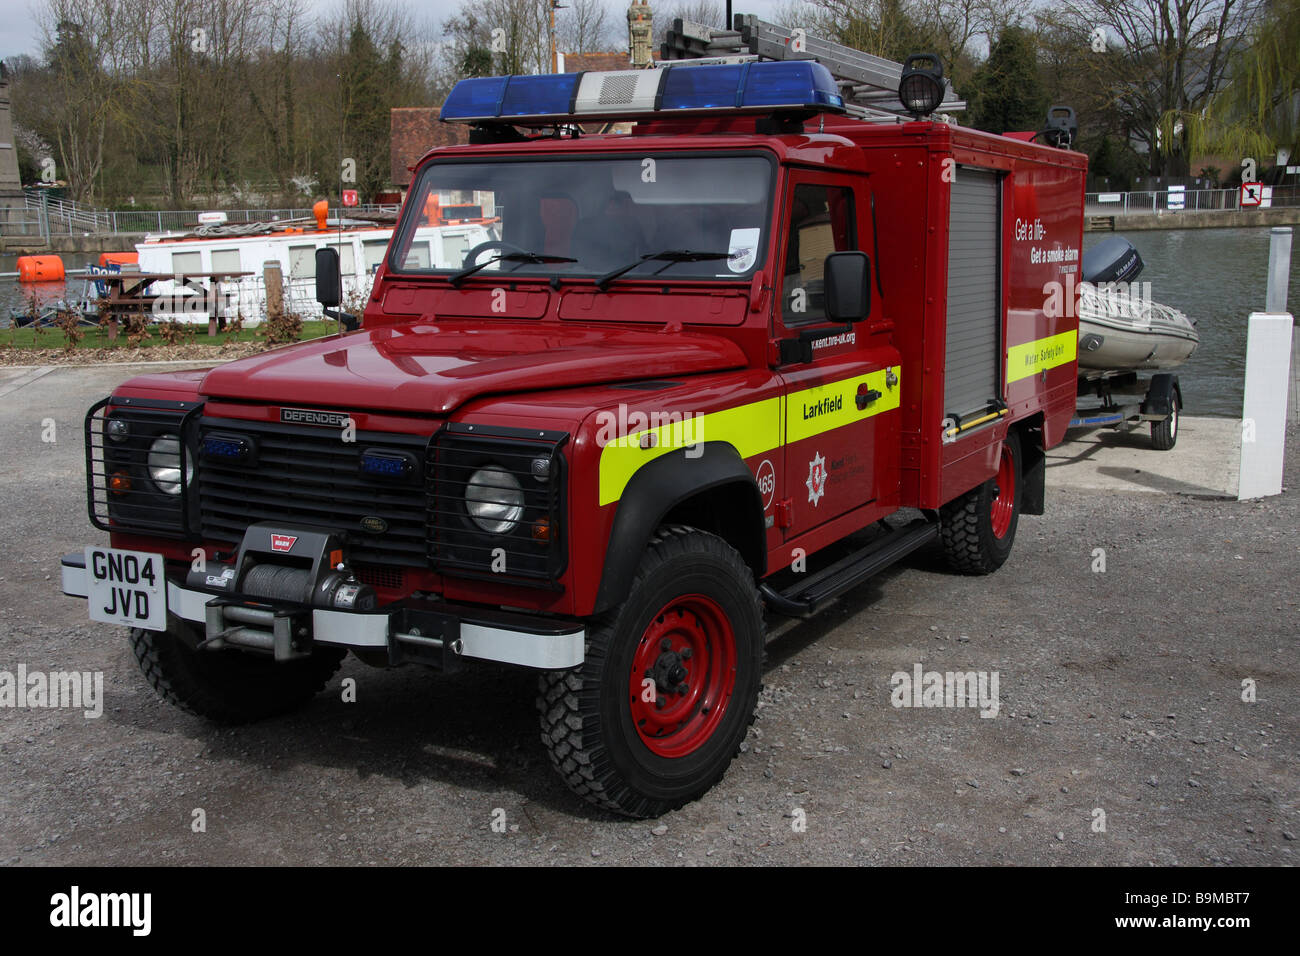 river medway fire engine service emergency equipment simulation training water vehicle firemen Stock Photo